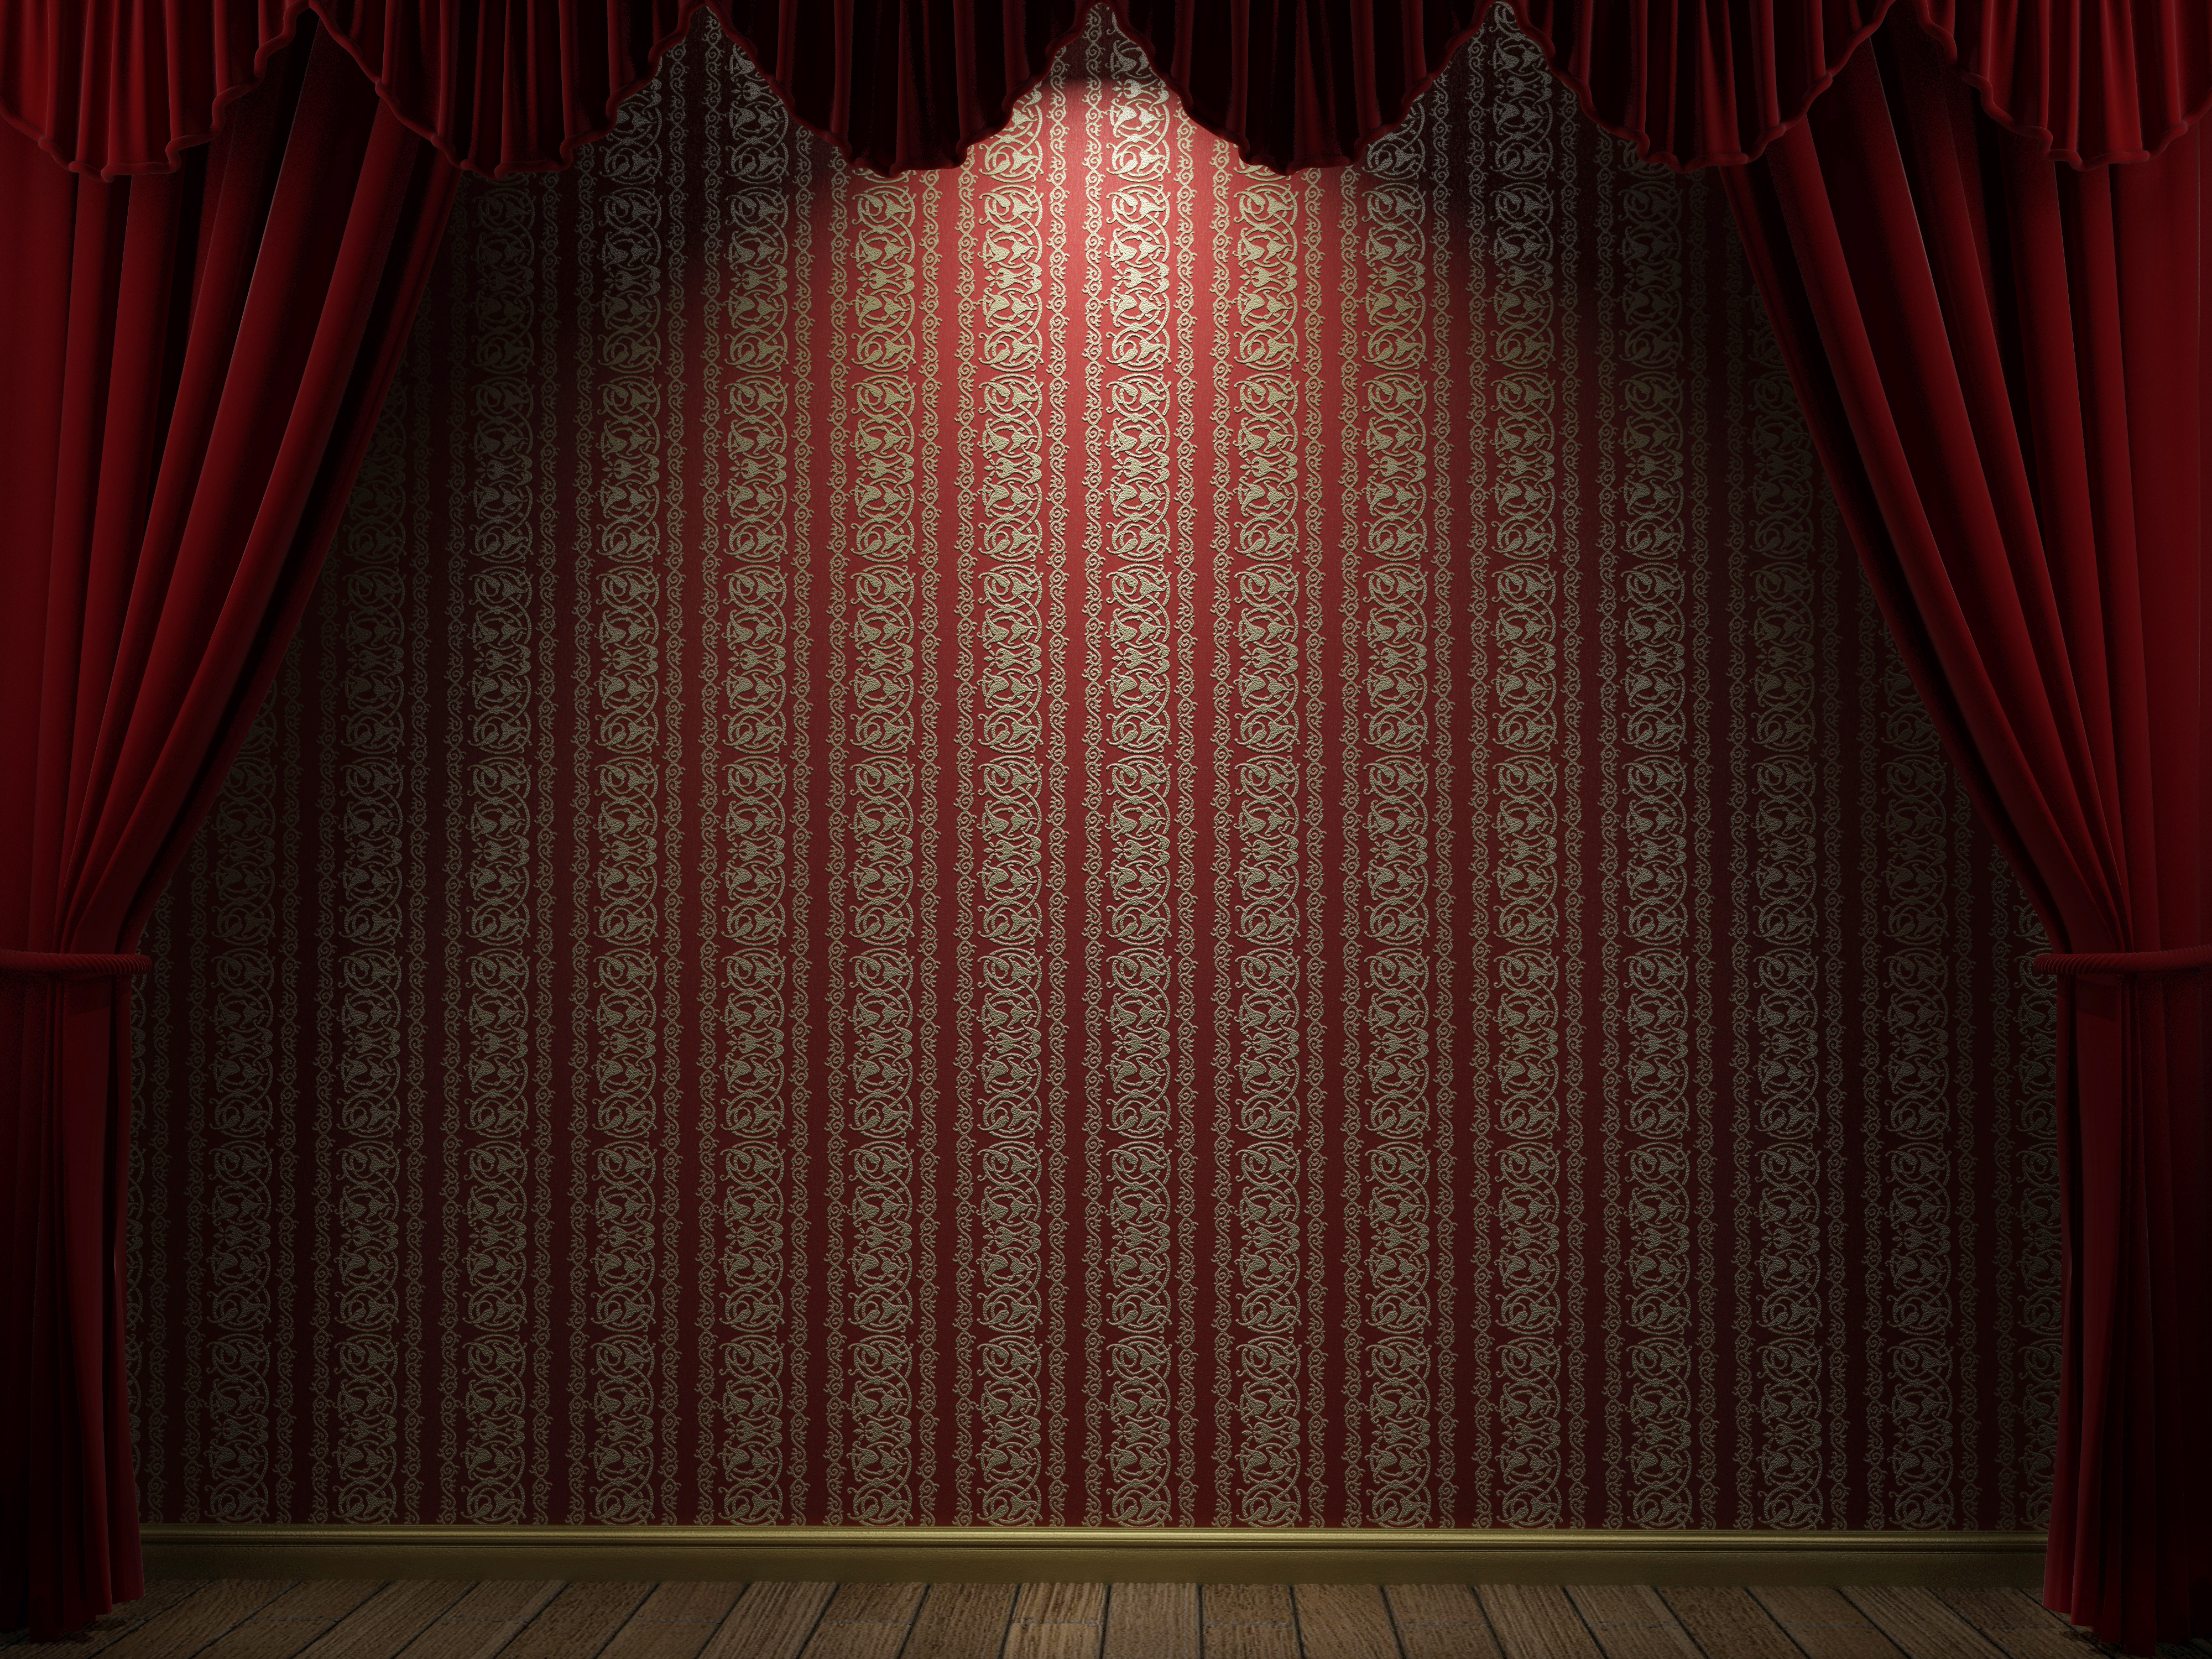 Stage curtains background - bing images.
